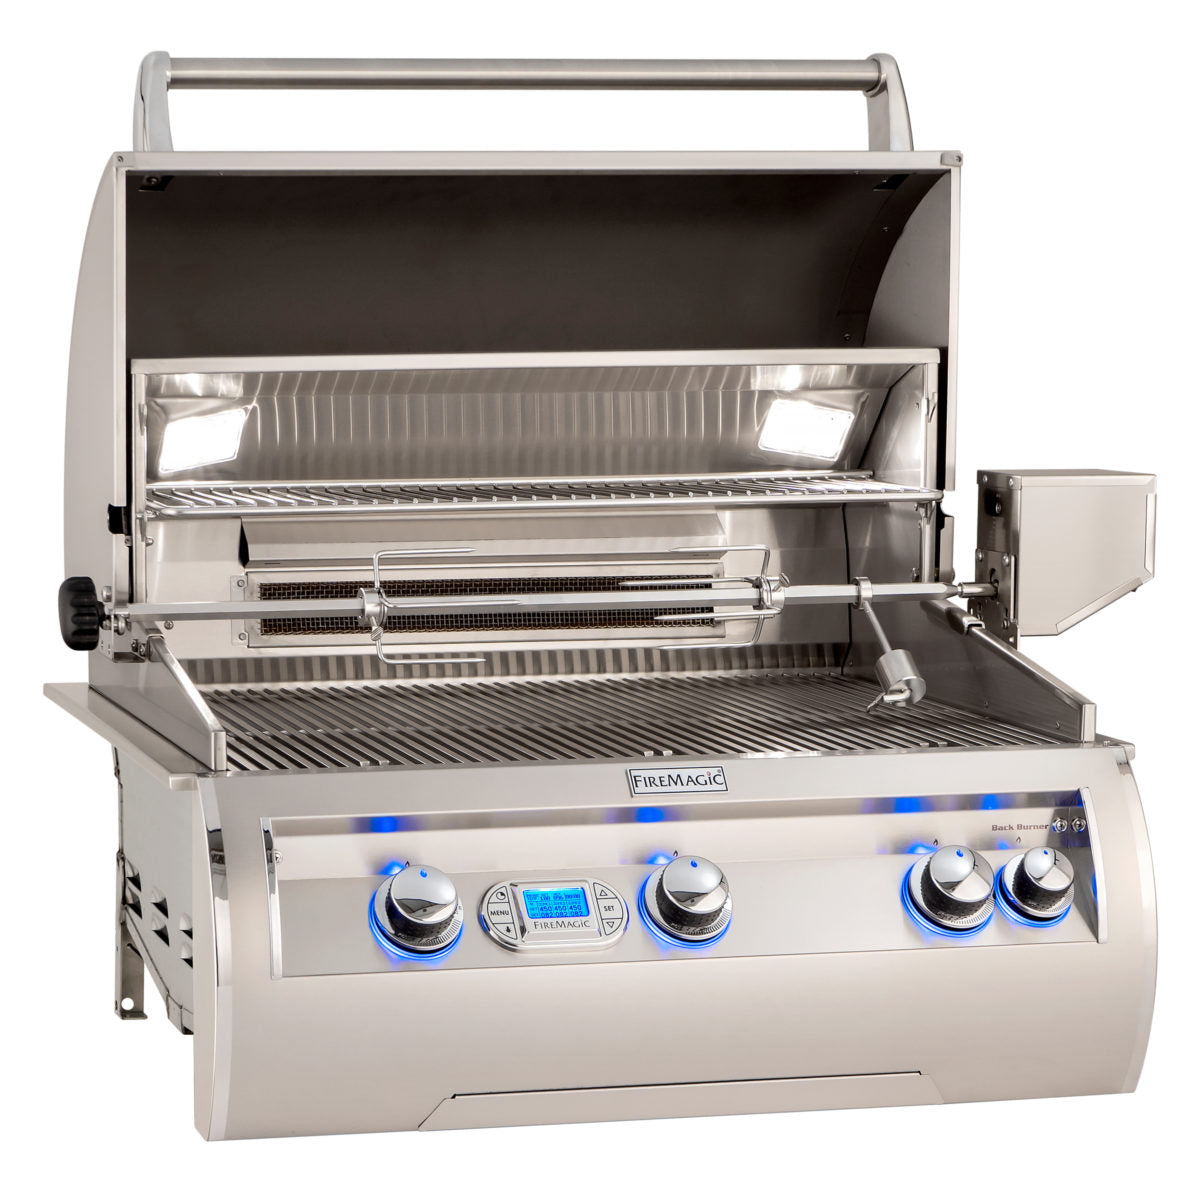 FireMagic Echelon E660i Built-In 30 in. Grill with Digital Thermometer